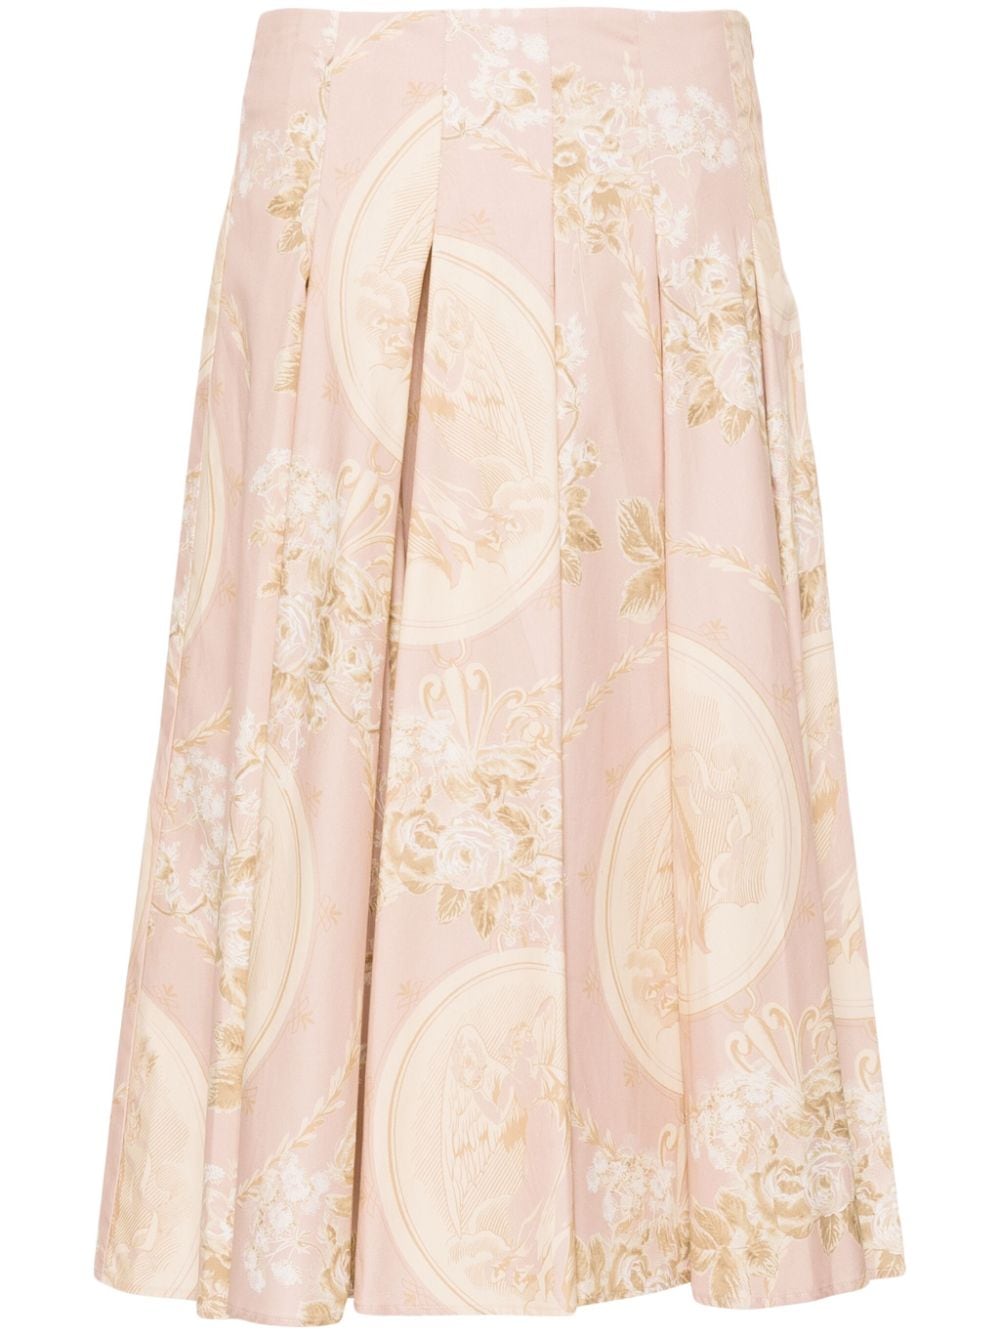 Semicouture floral-print cotton pleated skirt - Pink von Semicouture